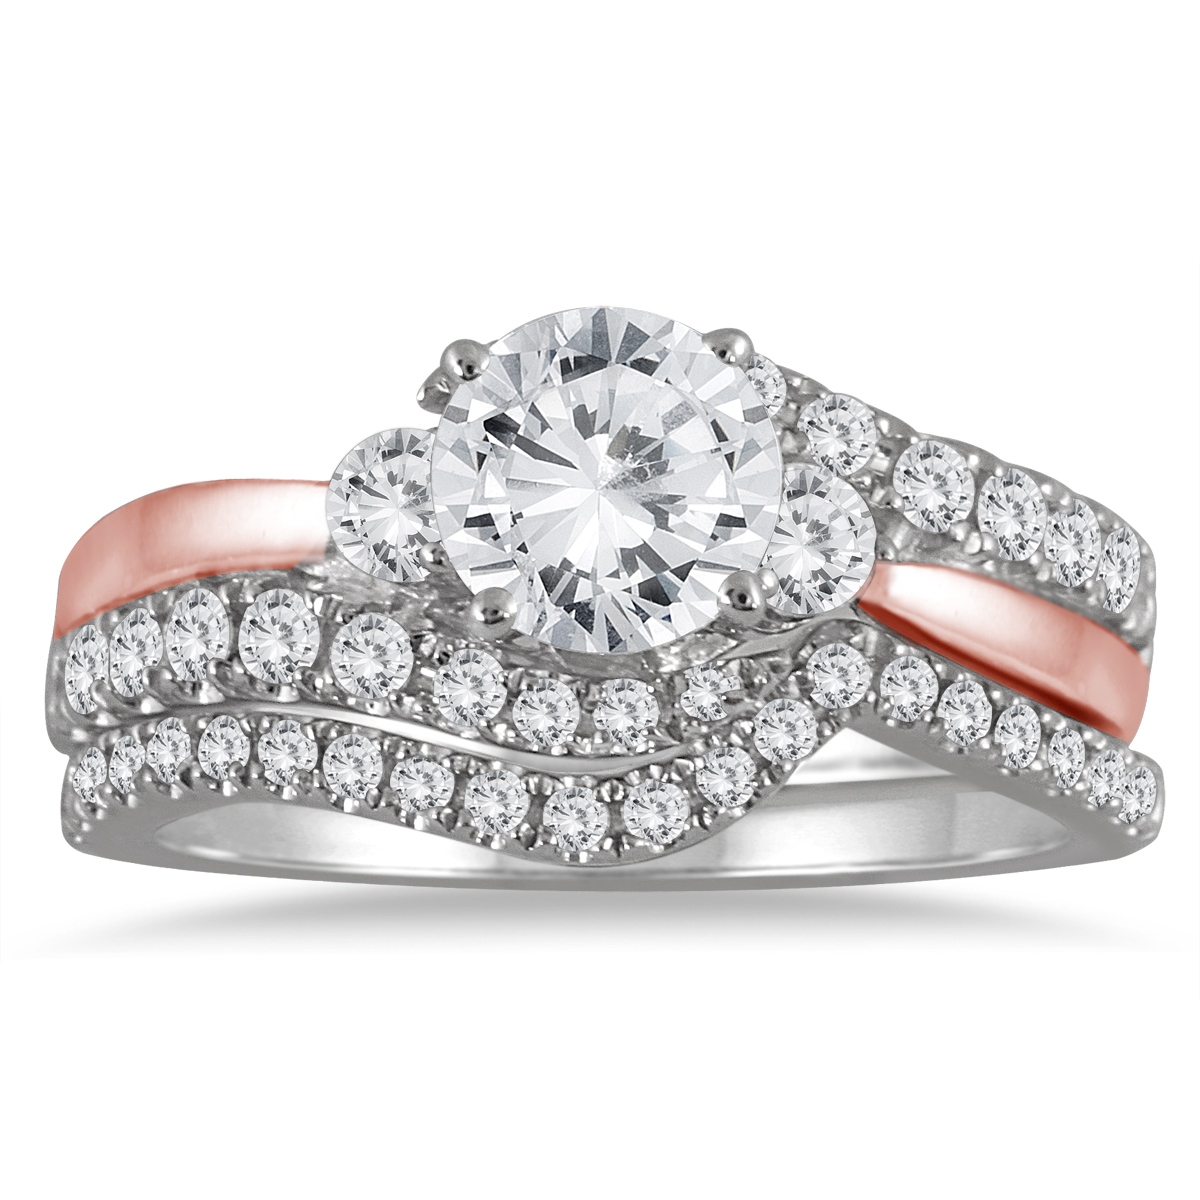 1 1/2 Carat Diamond Bridal Set in Two Toned 14K Pink and White Gold